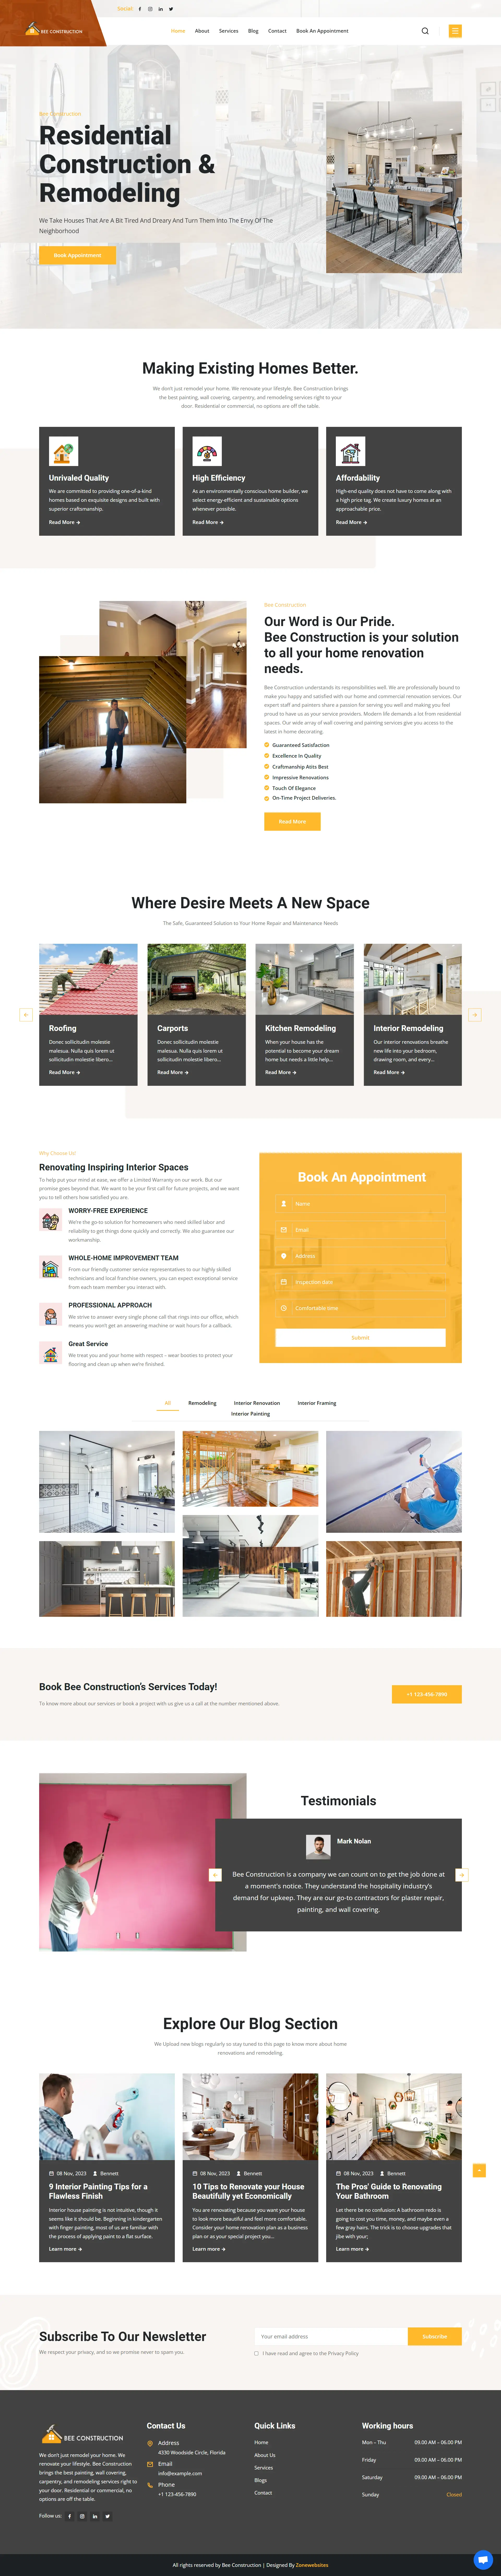 Home Repair and Maintenance Website Layout